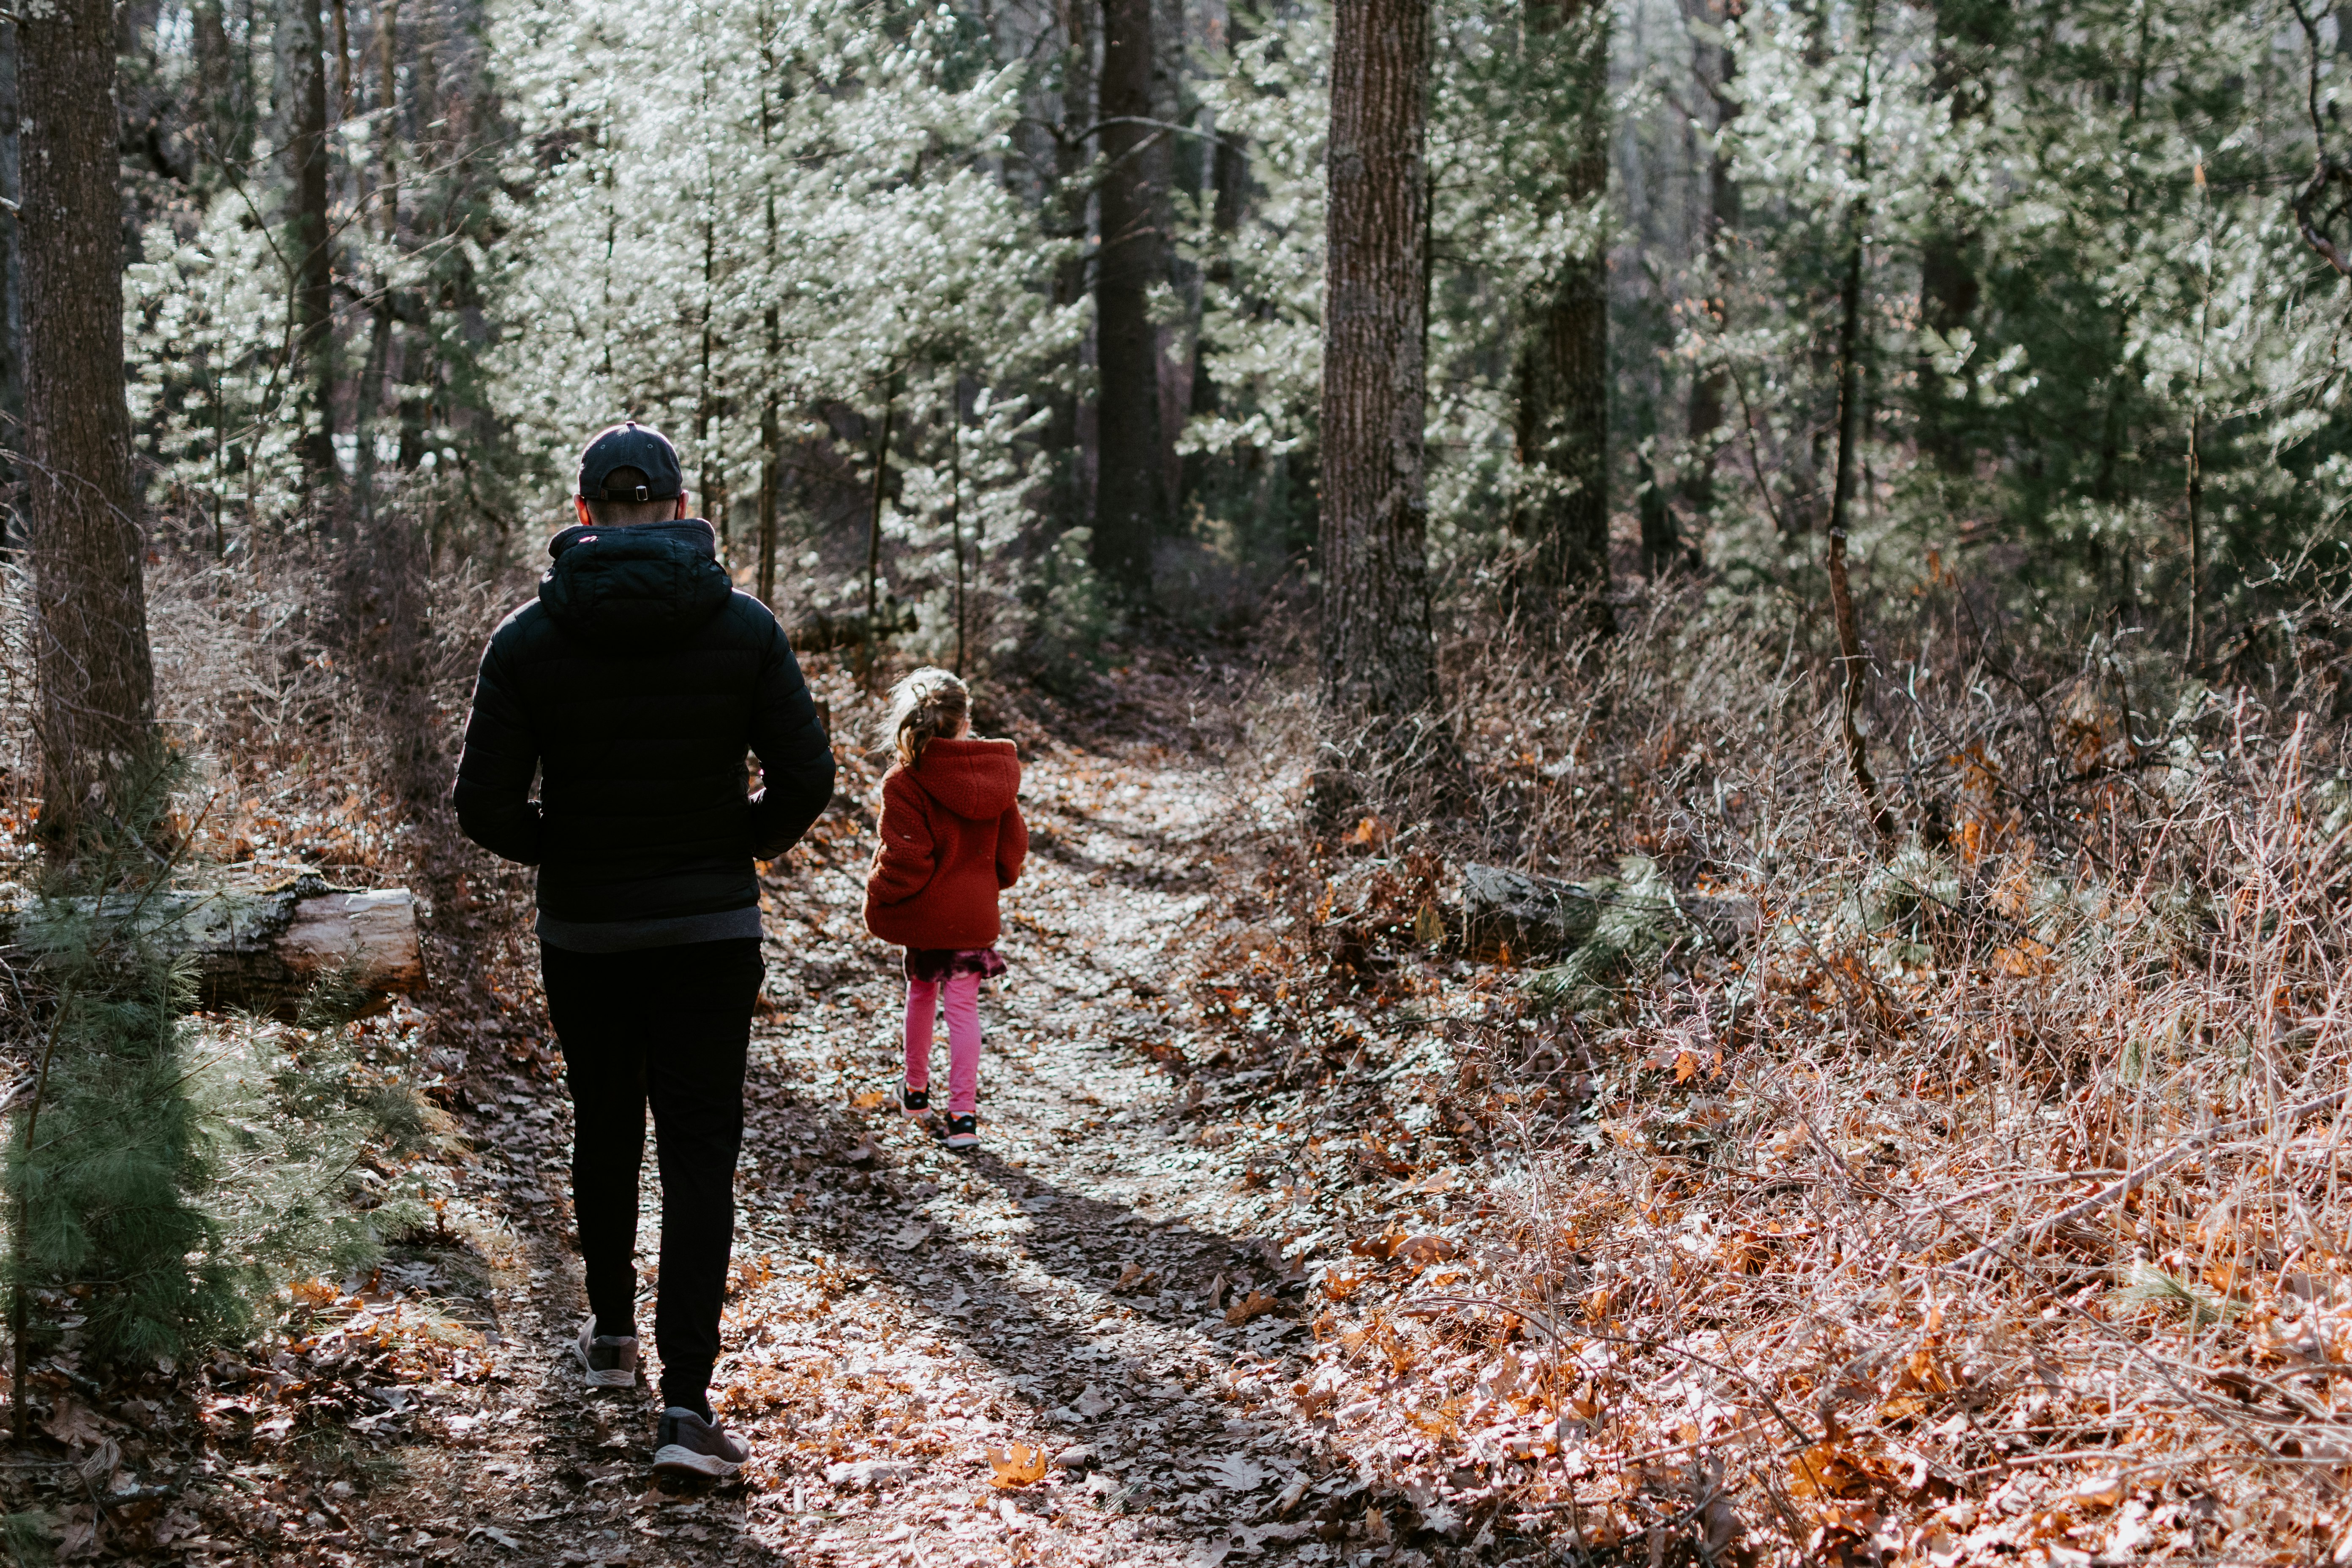 Father and daughter walking a trail together